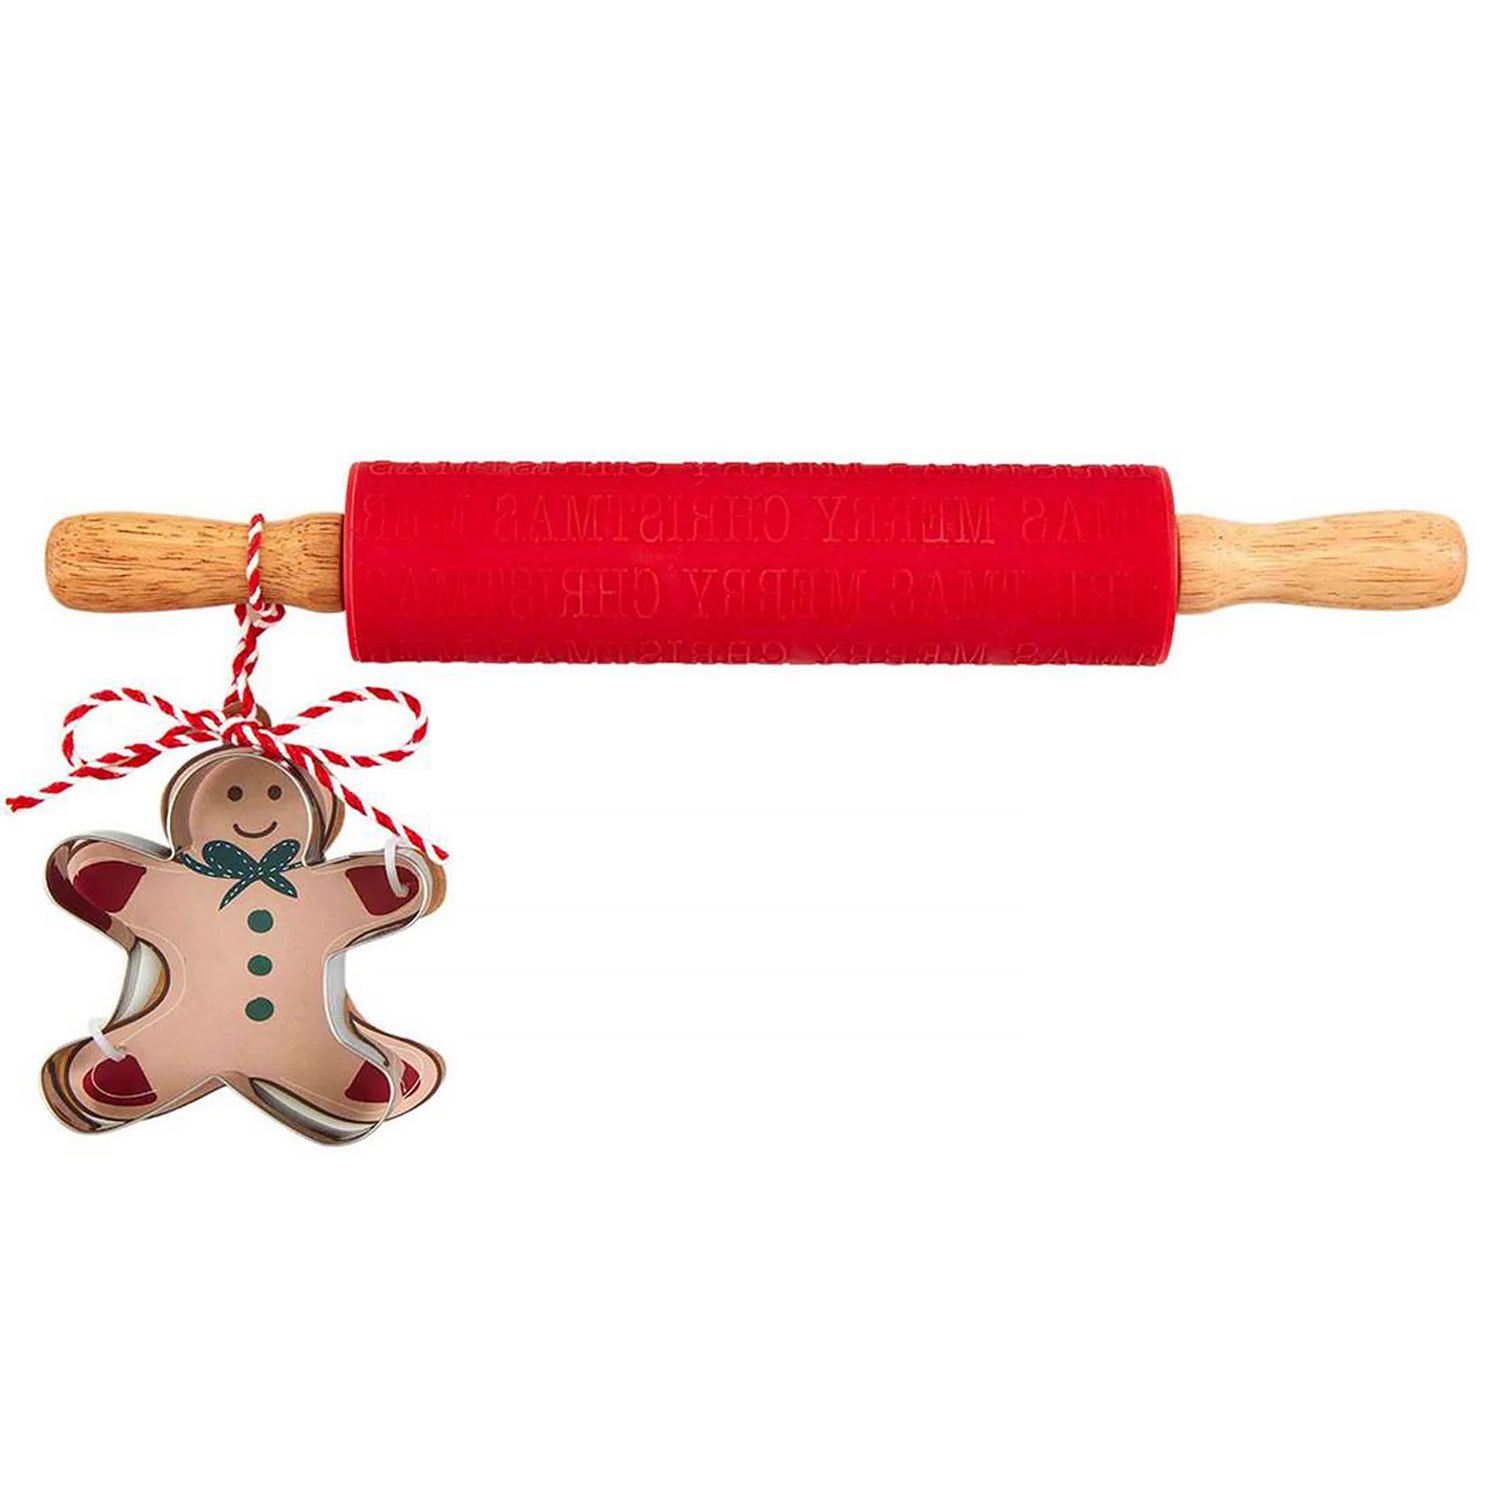 Merry Christmas Rolling Pin Set